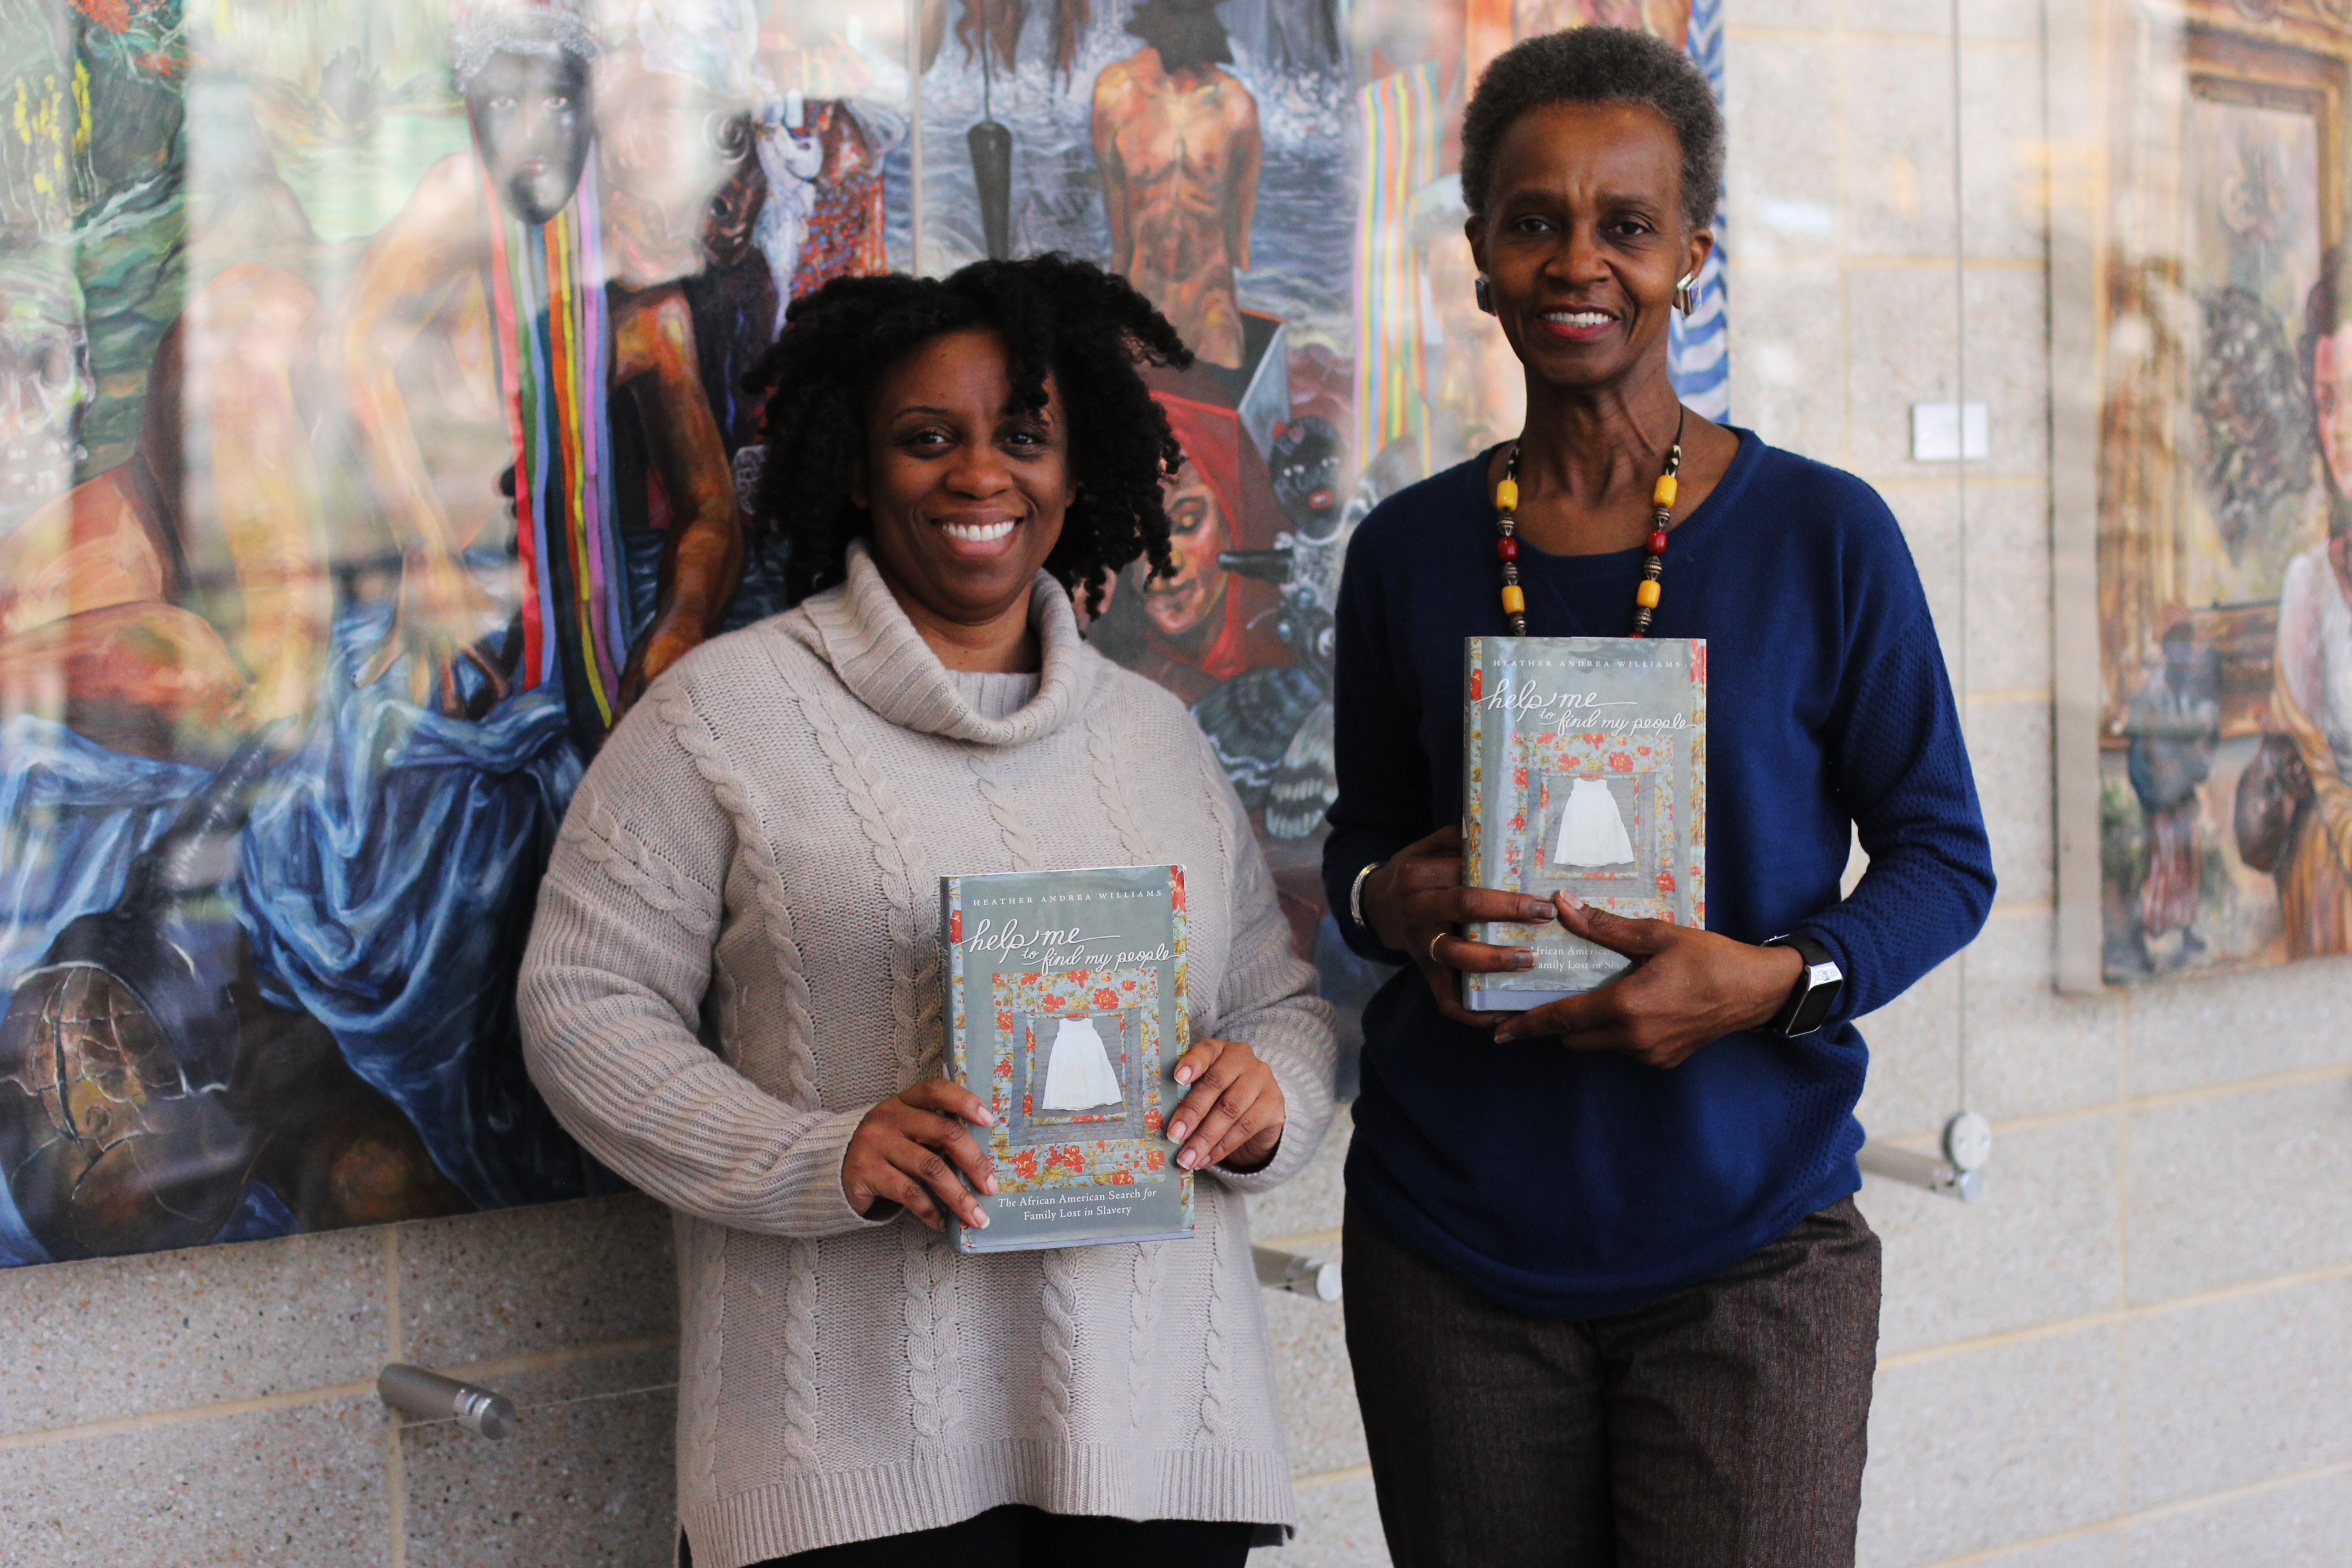 Tanya Shields and Kathy Perkins hold up the book "Help Me to Find My People" by former UNC-Chapel Hill professor, Heather Williams.